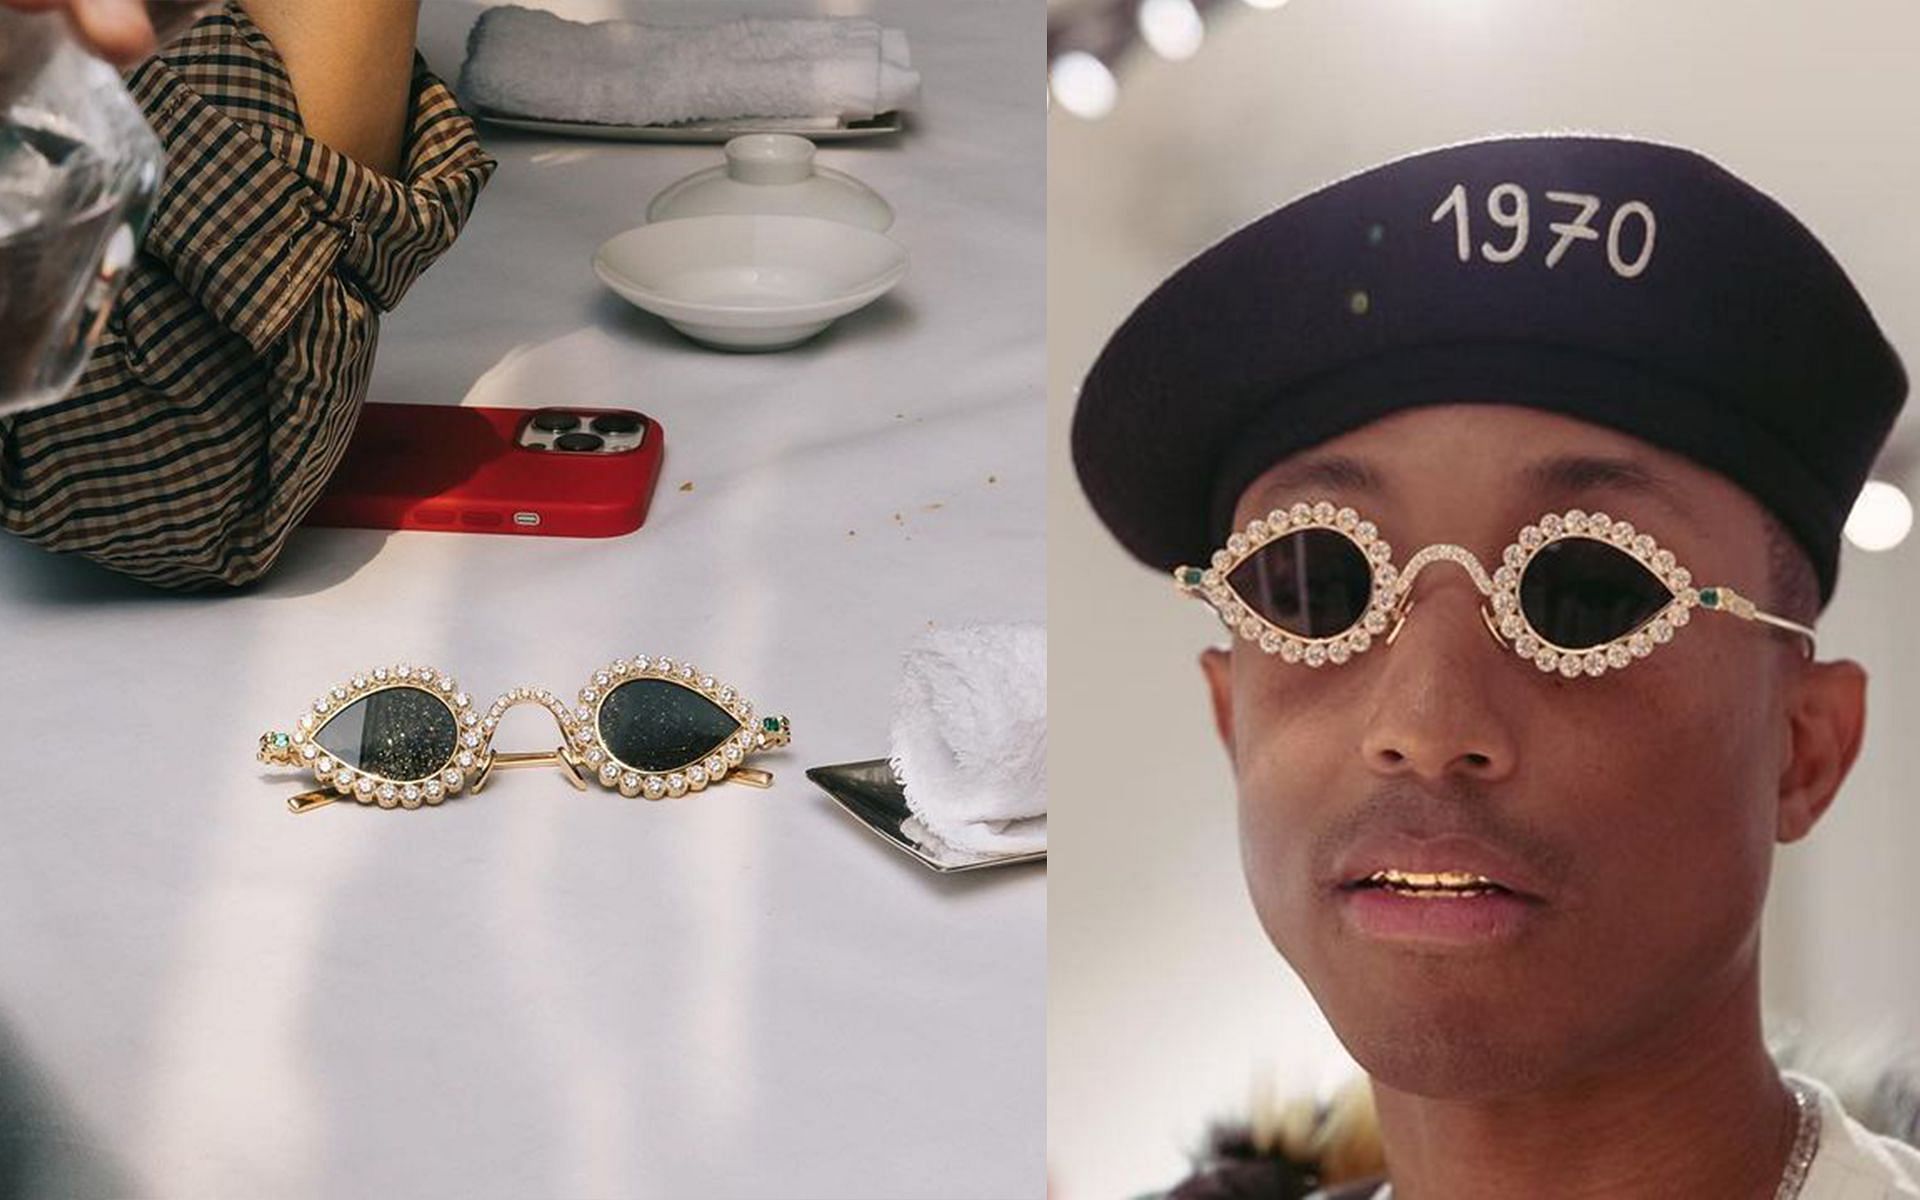 "Where's the credit?": Outrage over Pharrell Williams' Tiffany glasses